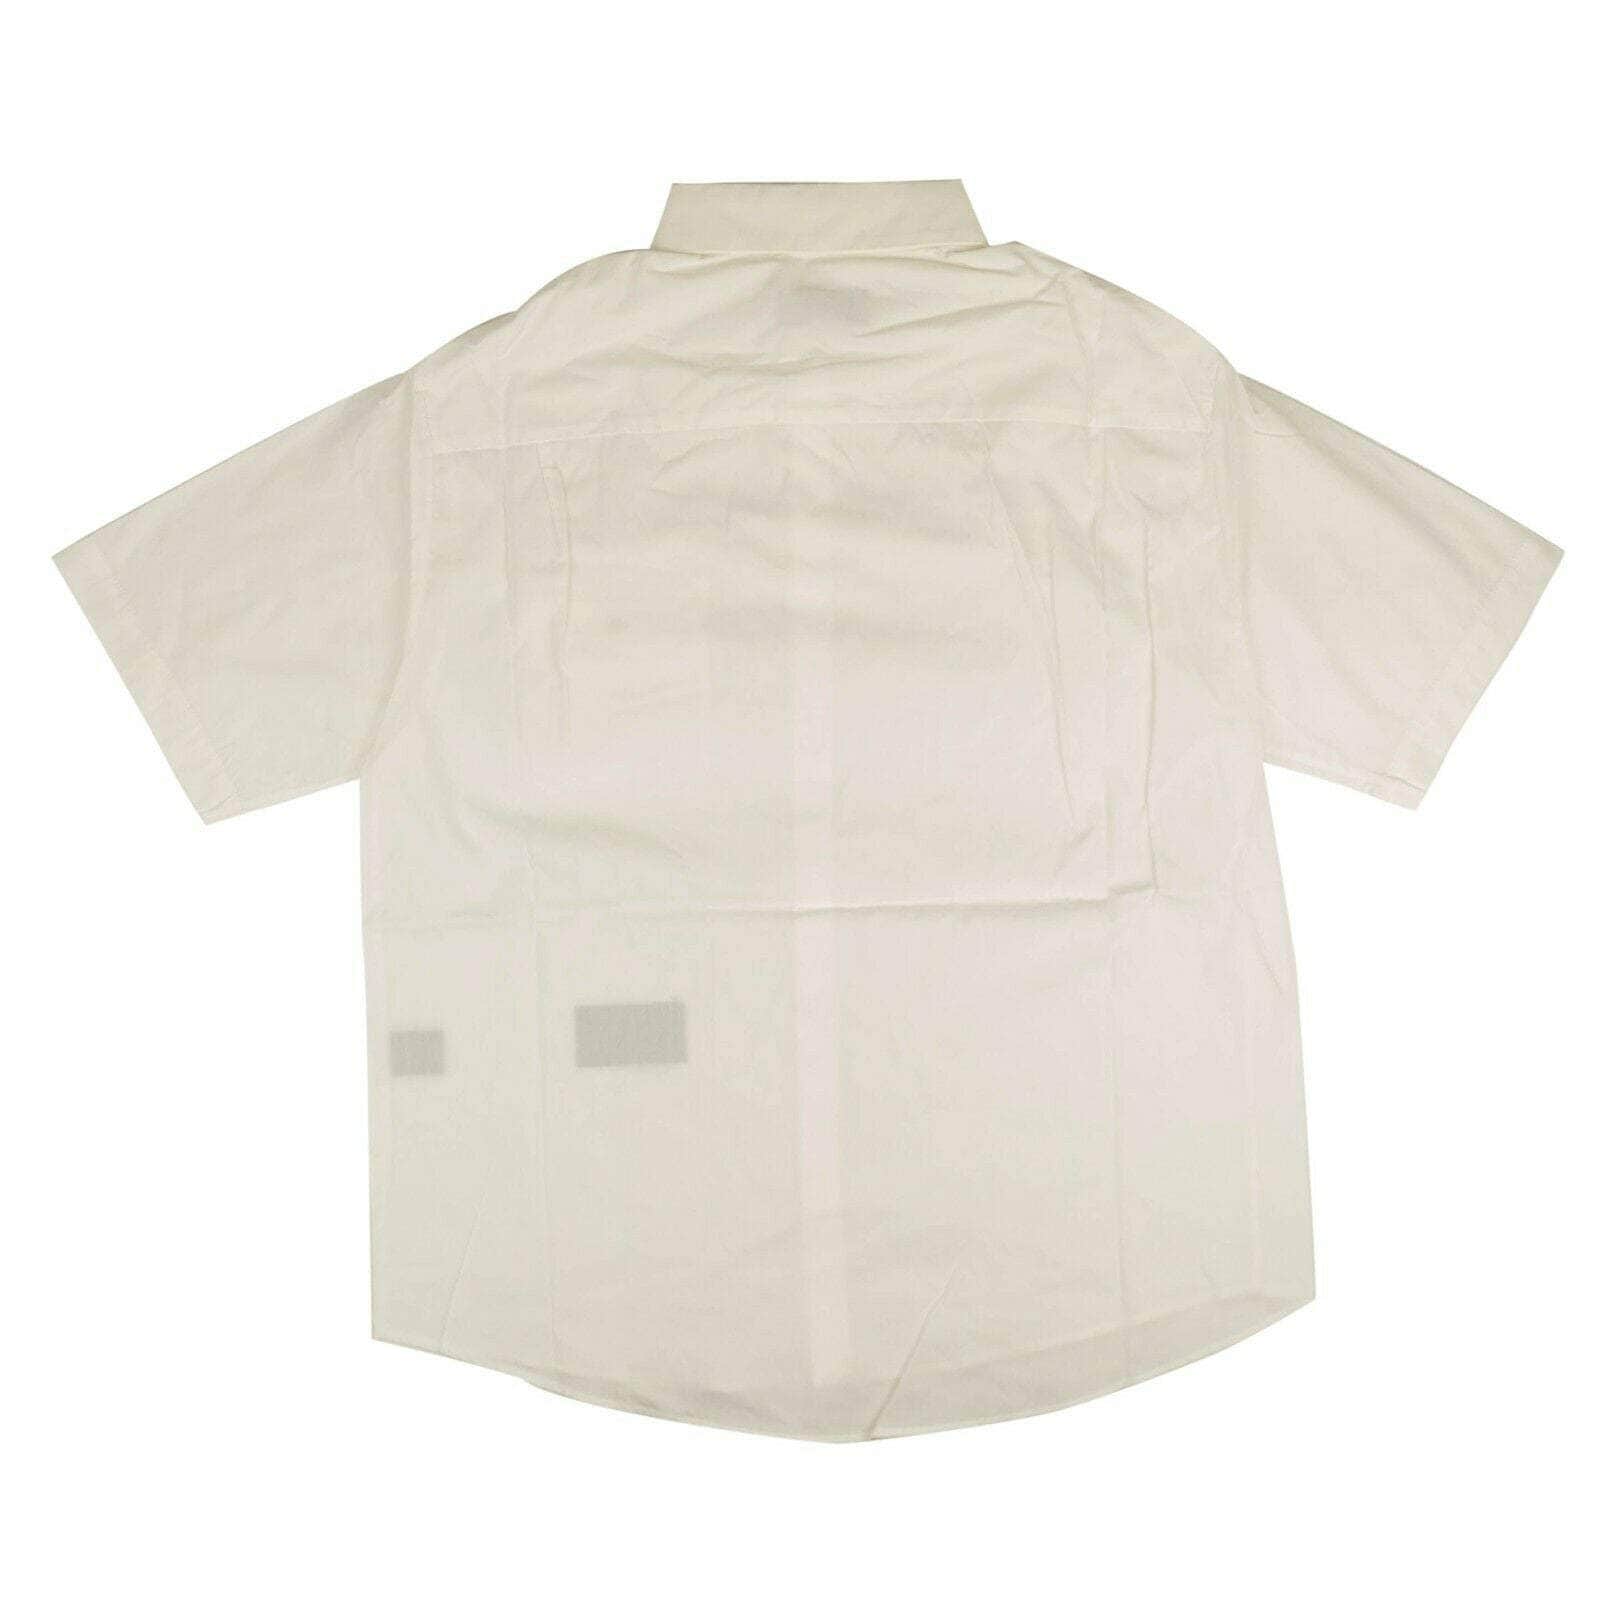 424 ON FAIRFAX 250-500, 424-on-fairfax, channelenable-all, chicmi, couponcollection, gender-mens, main-clothing, mens-shoes, size-l, size-m, size-s, size-xl, size-xs White Short Sleeve Red Logo Patch Button Down